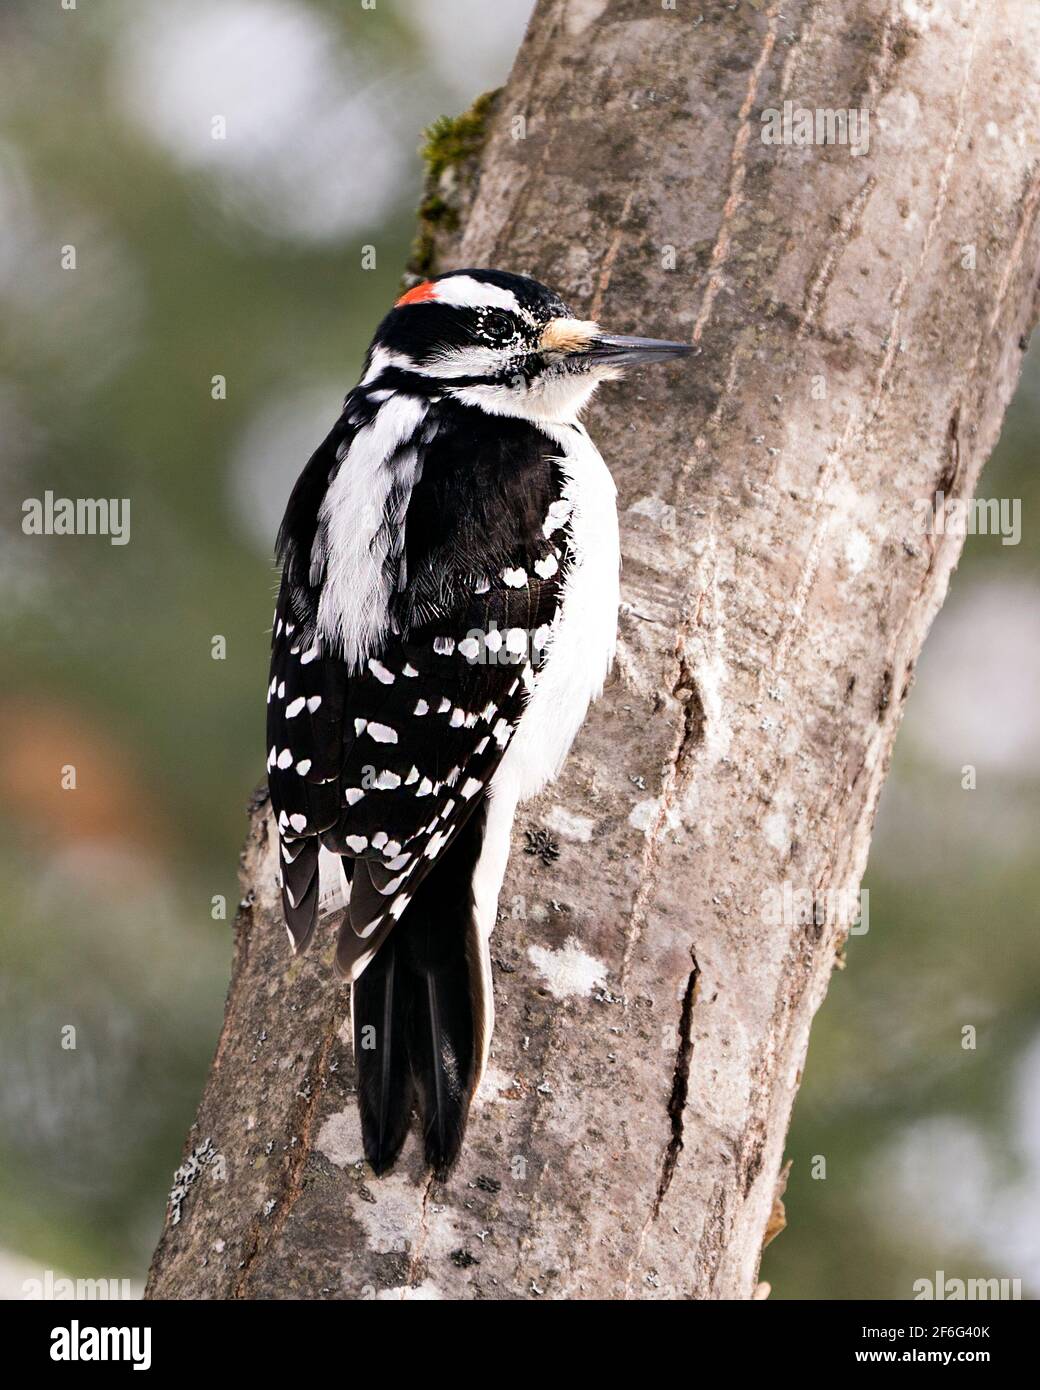 Woodpecker close-up profile view climbing tree trunk and displaying feather plumage in its environment in the forest with a blur background. Image. Stock Photo